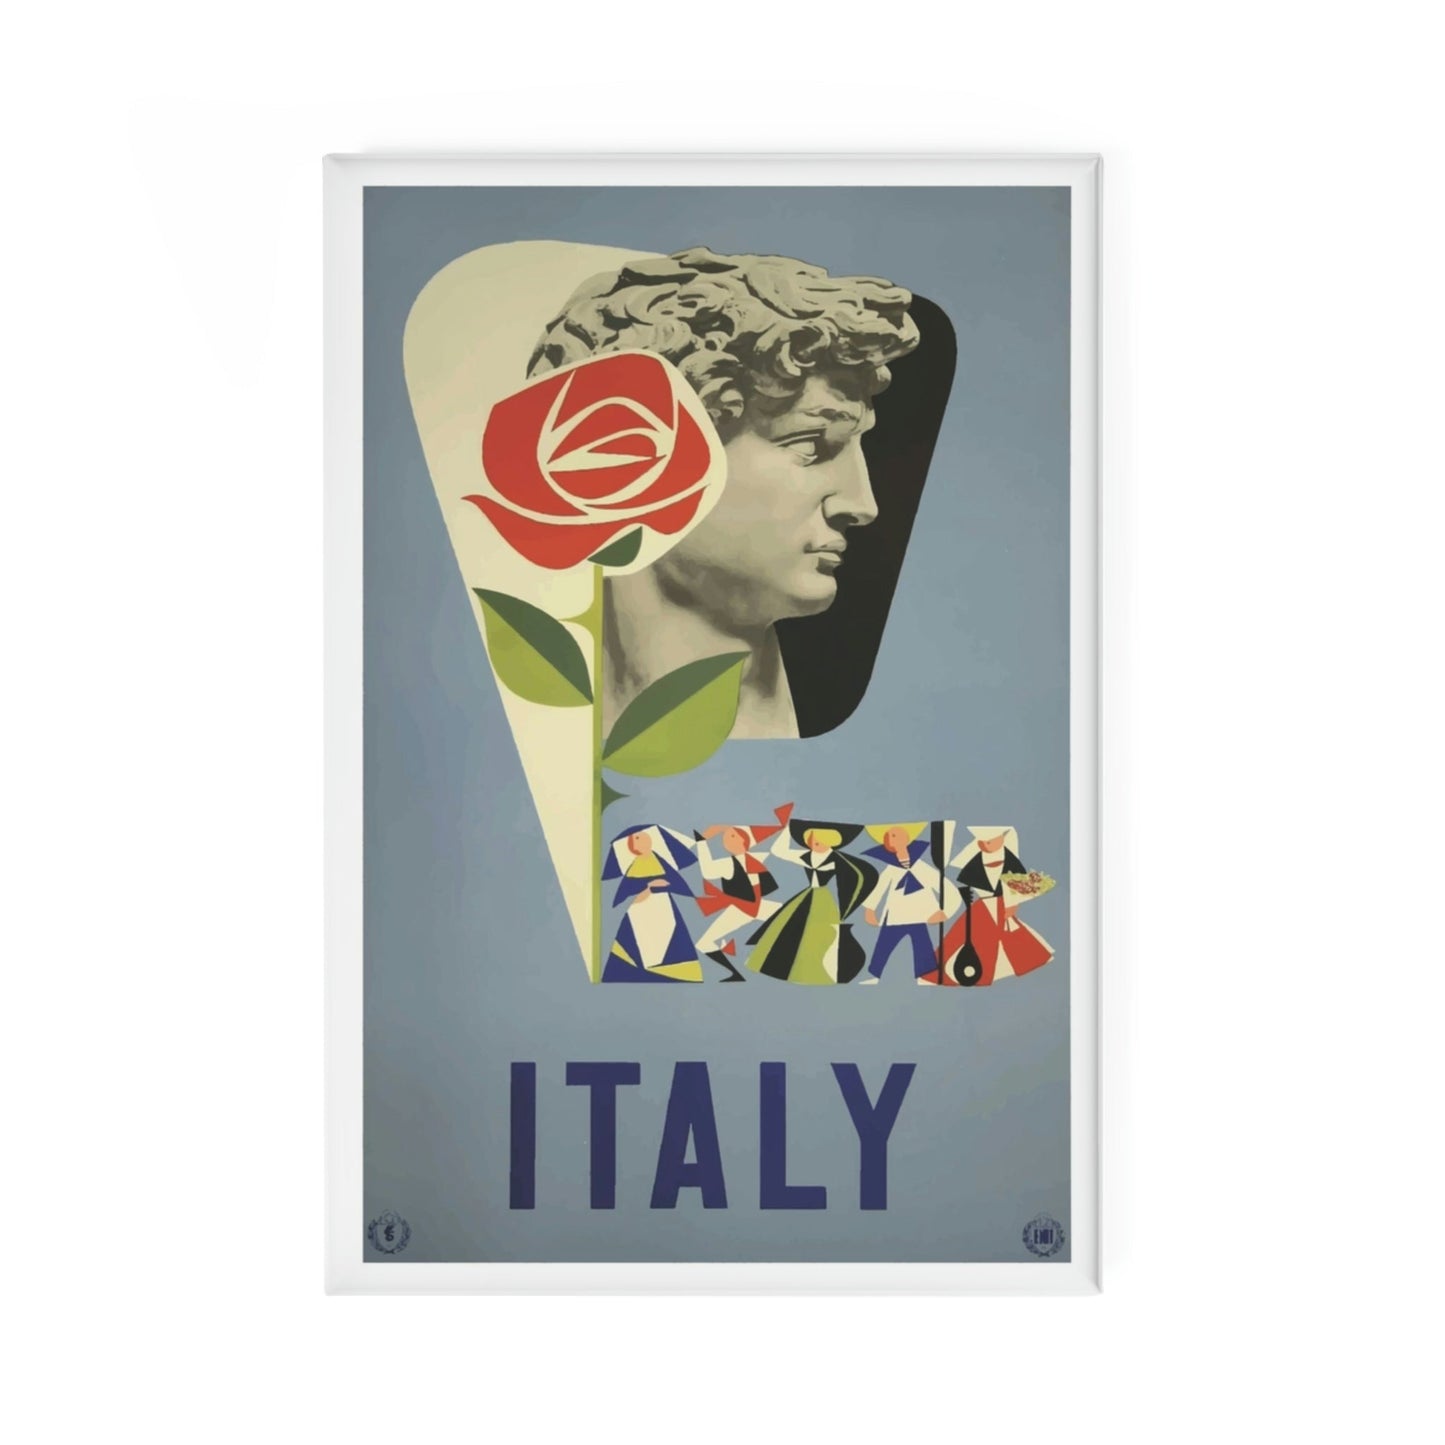 Italy Magnet